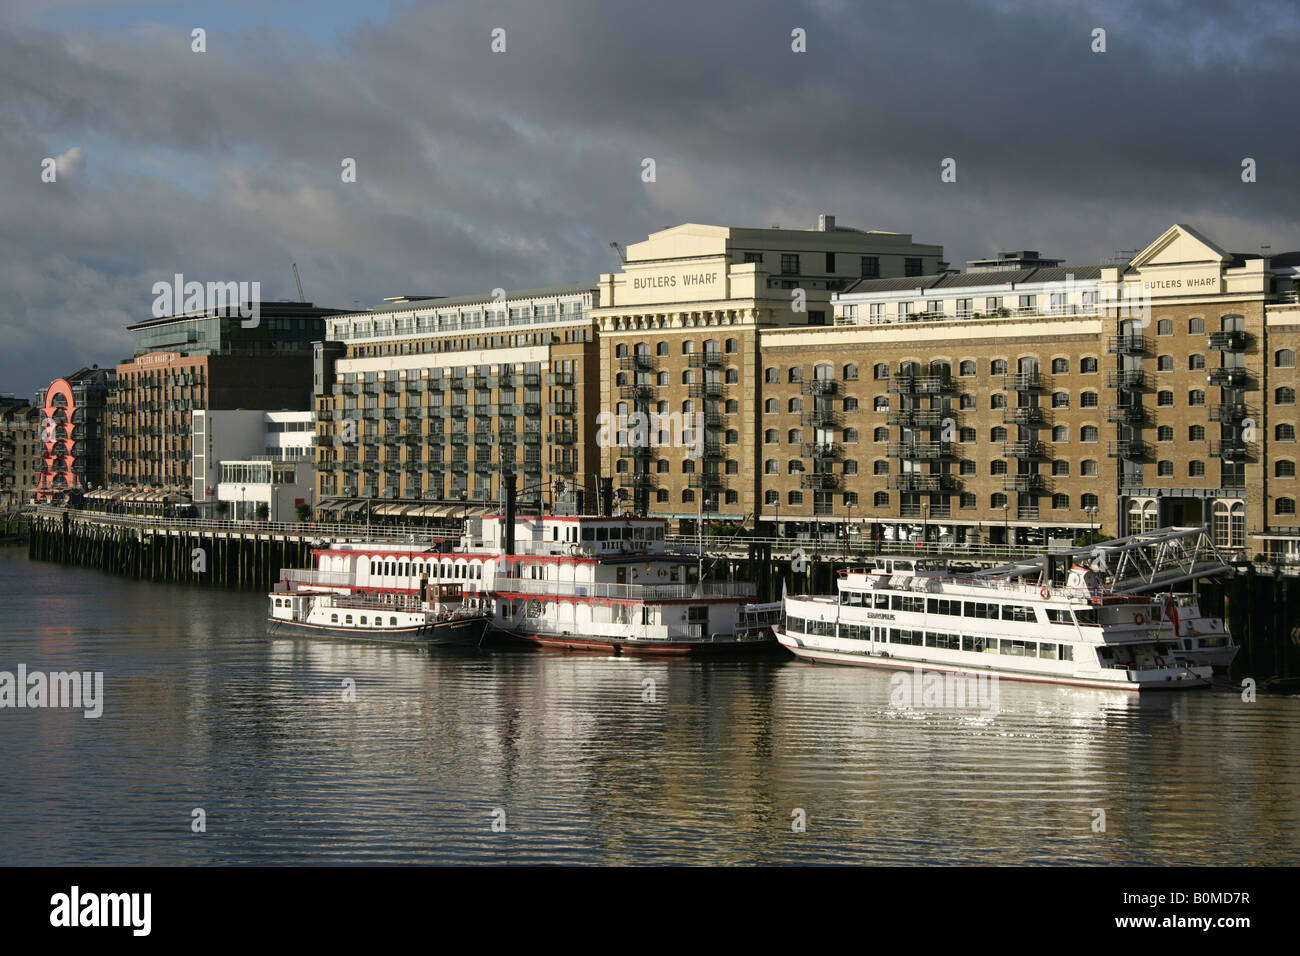 City of London, England. Morning view of Thames river cruise entertainment ships moored at Butlers Wharf on the River Thames. Stock Photo